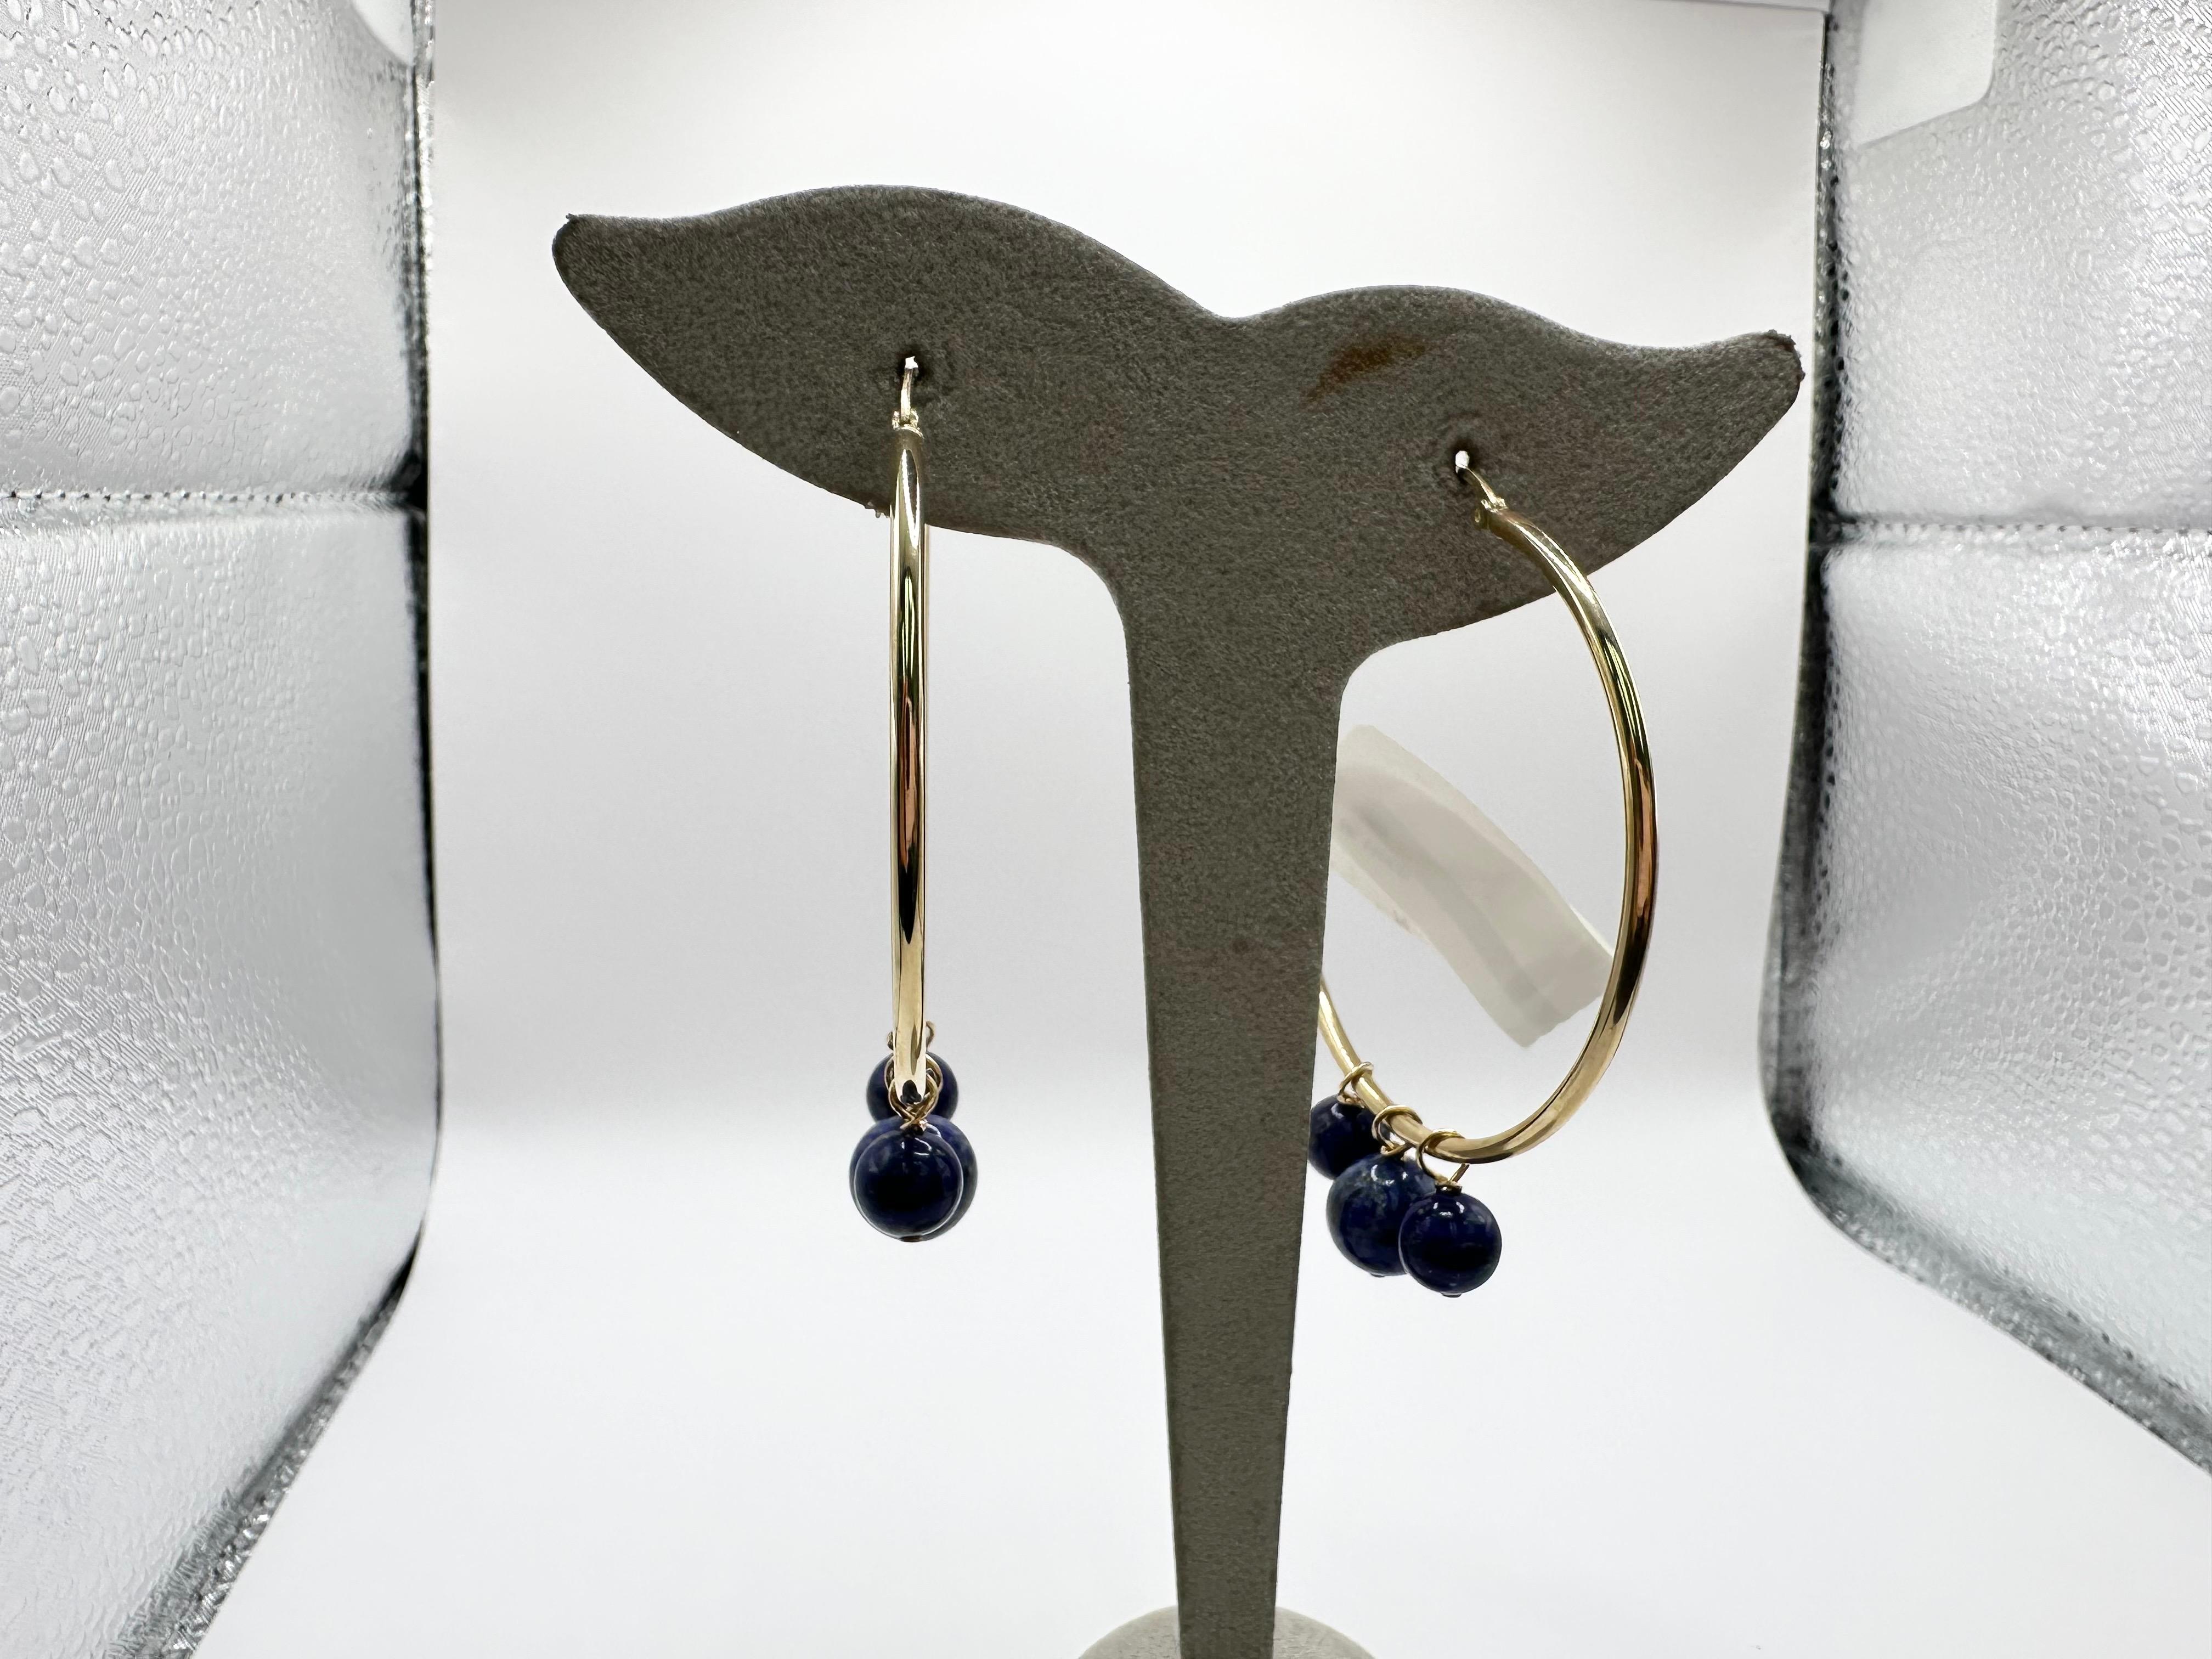 Stunning hoop earrings made with 14KT gold, beautiful lapis lazuli beads complete these dangling beauties!

Metal Type: 14KT

Natural Gemstones: lapis lazuli
Certificate of authenticity comes with purchase!

ABOUT US
We are a family-owned business.